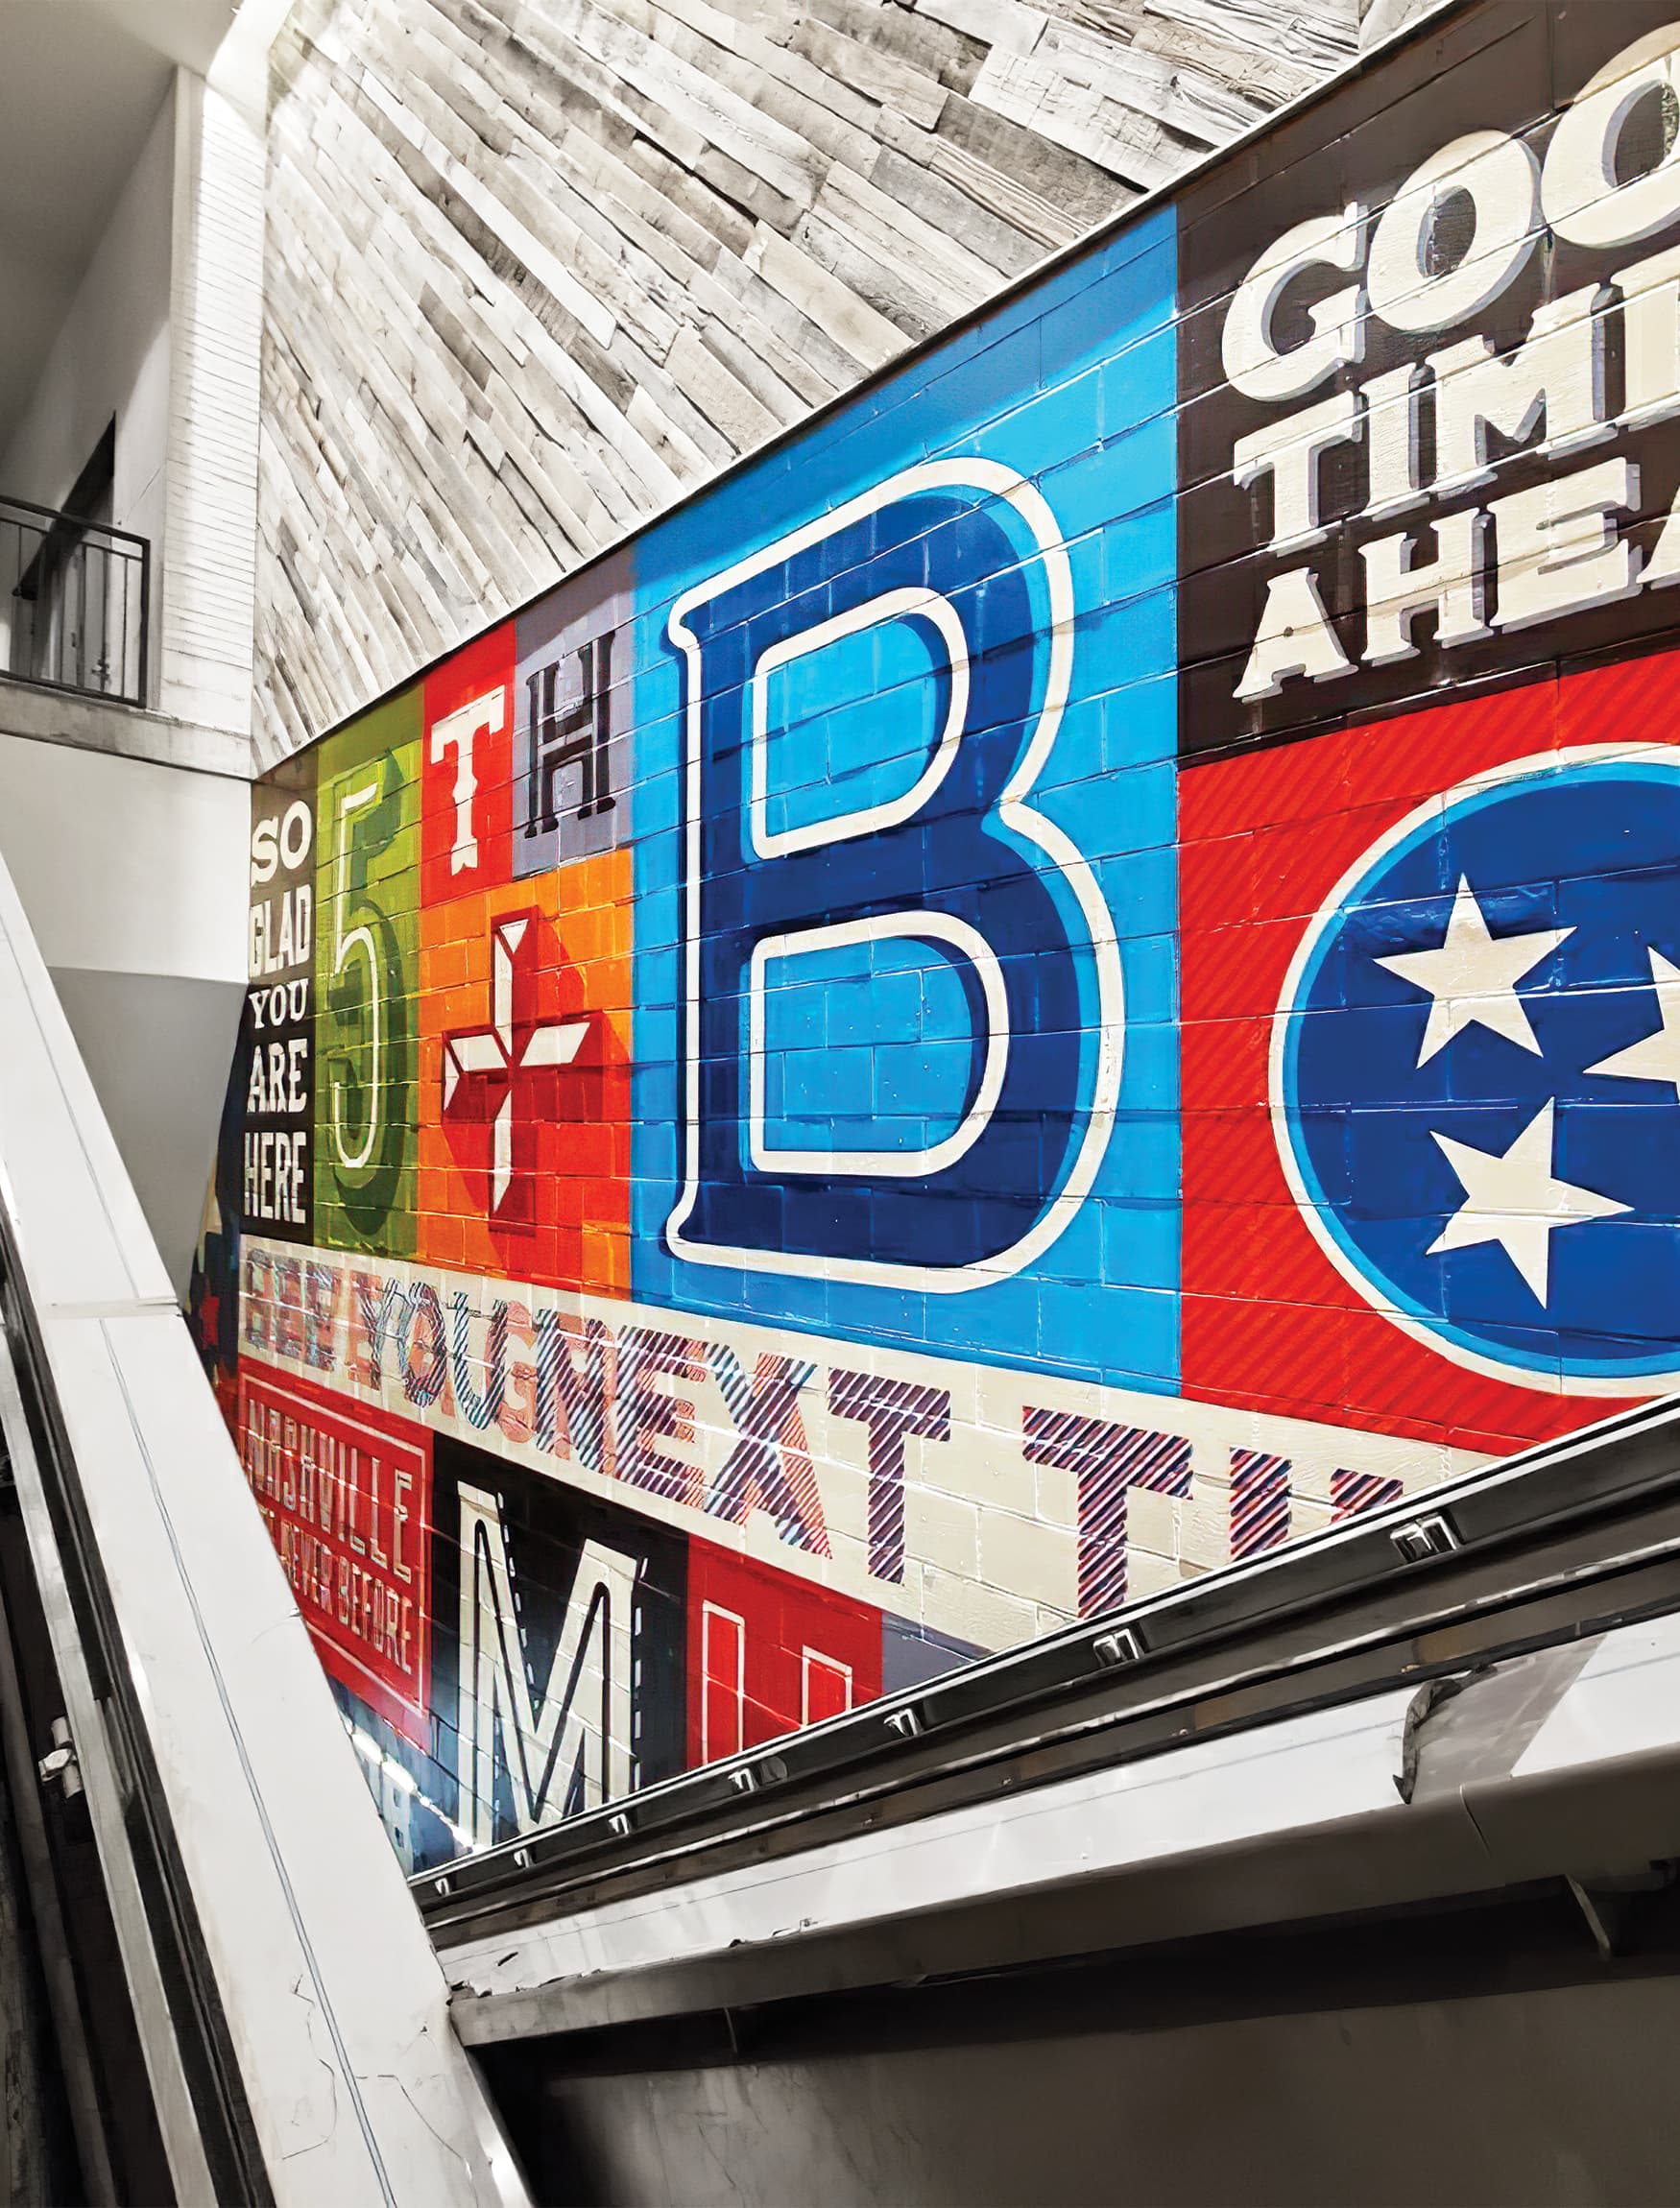 Placemaking large painted mural color blocks with brand expression of Fifth + Broadway by the escalators. Signage and wayfinding for Fifth + Broadway in Nashville, Tennessee by RSM Design